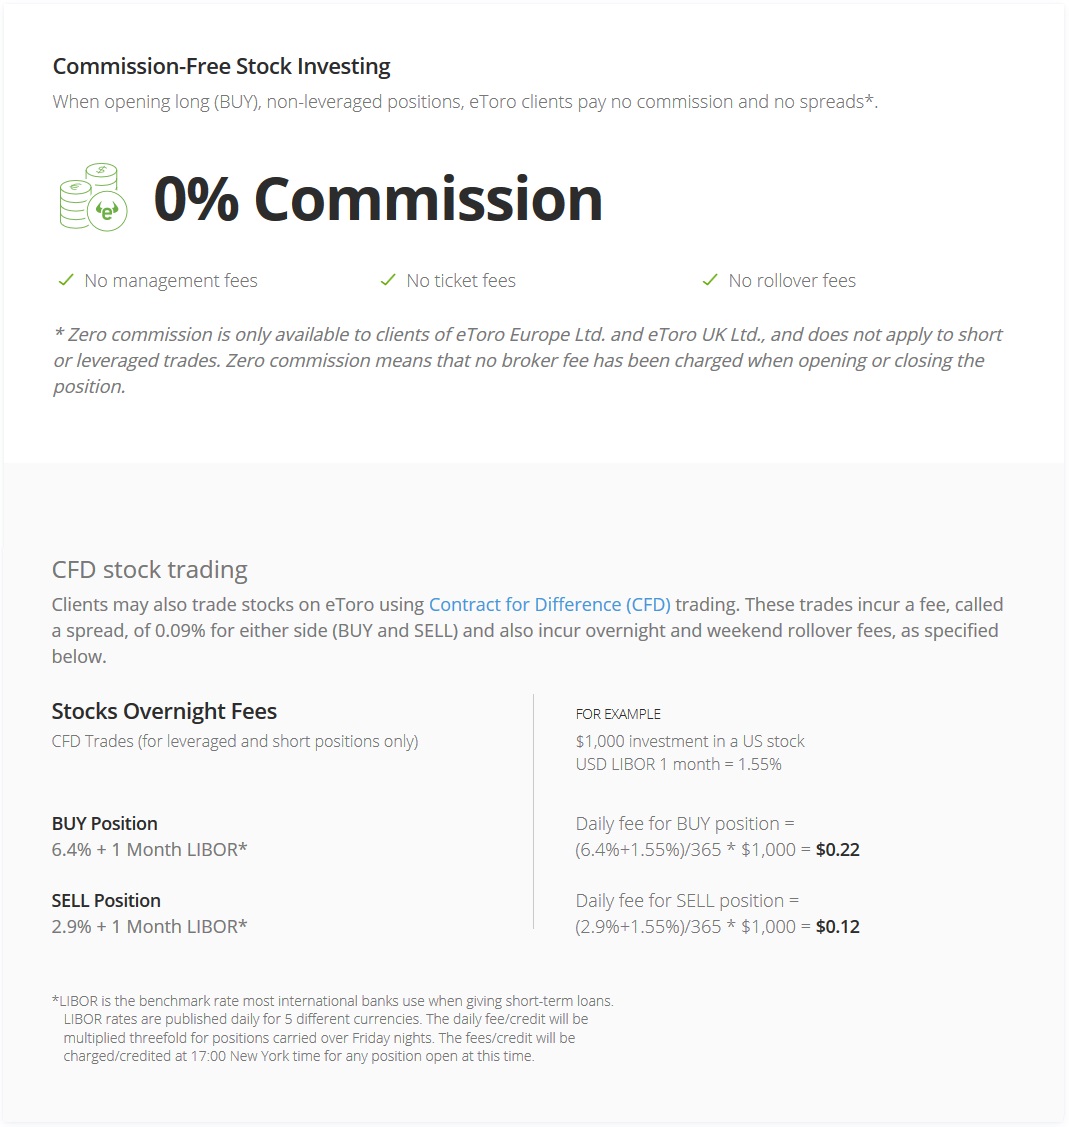 Stocks and ETF Trading on eToro Now Commission-Free | Real ...